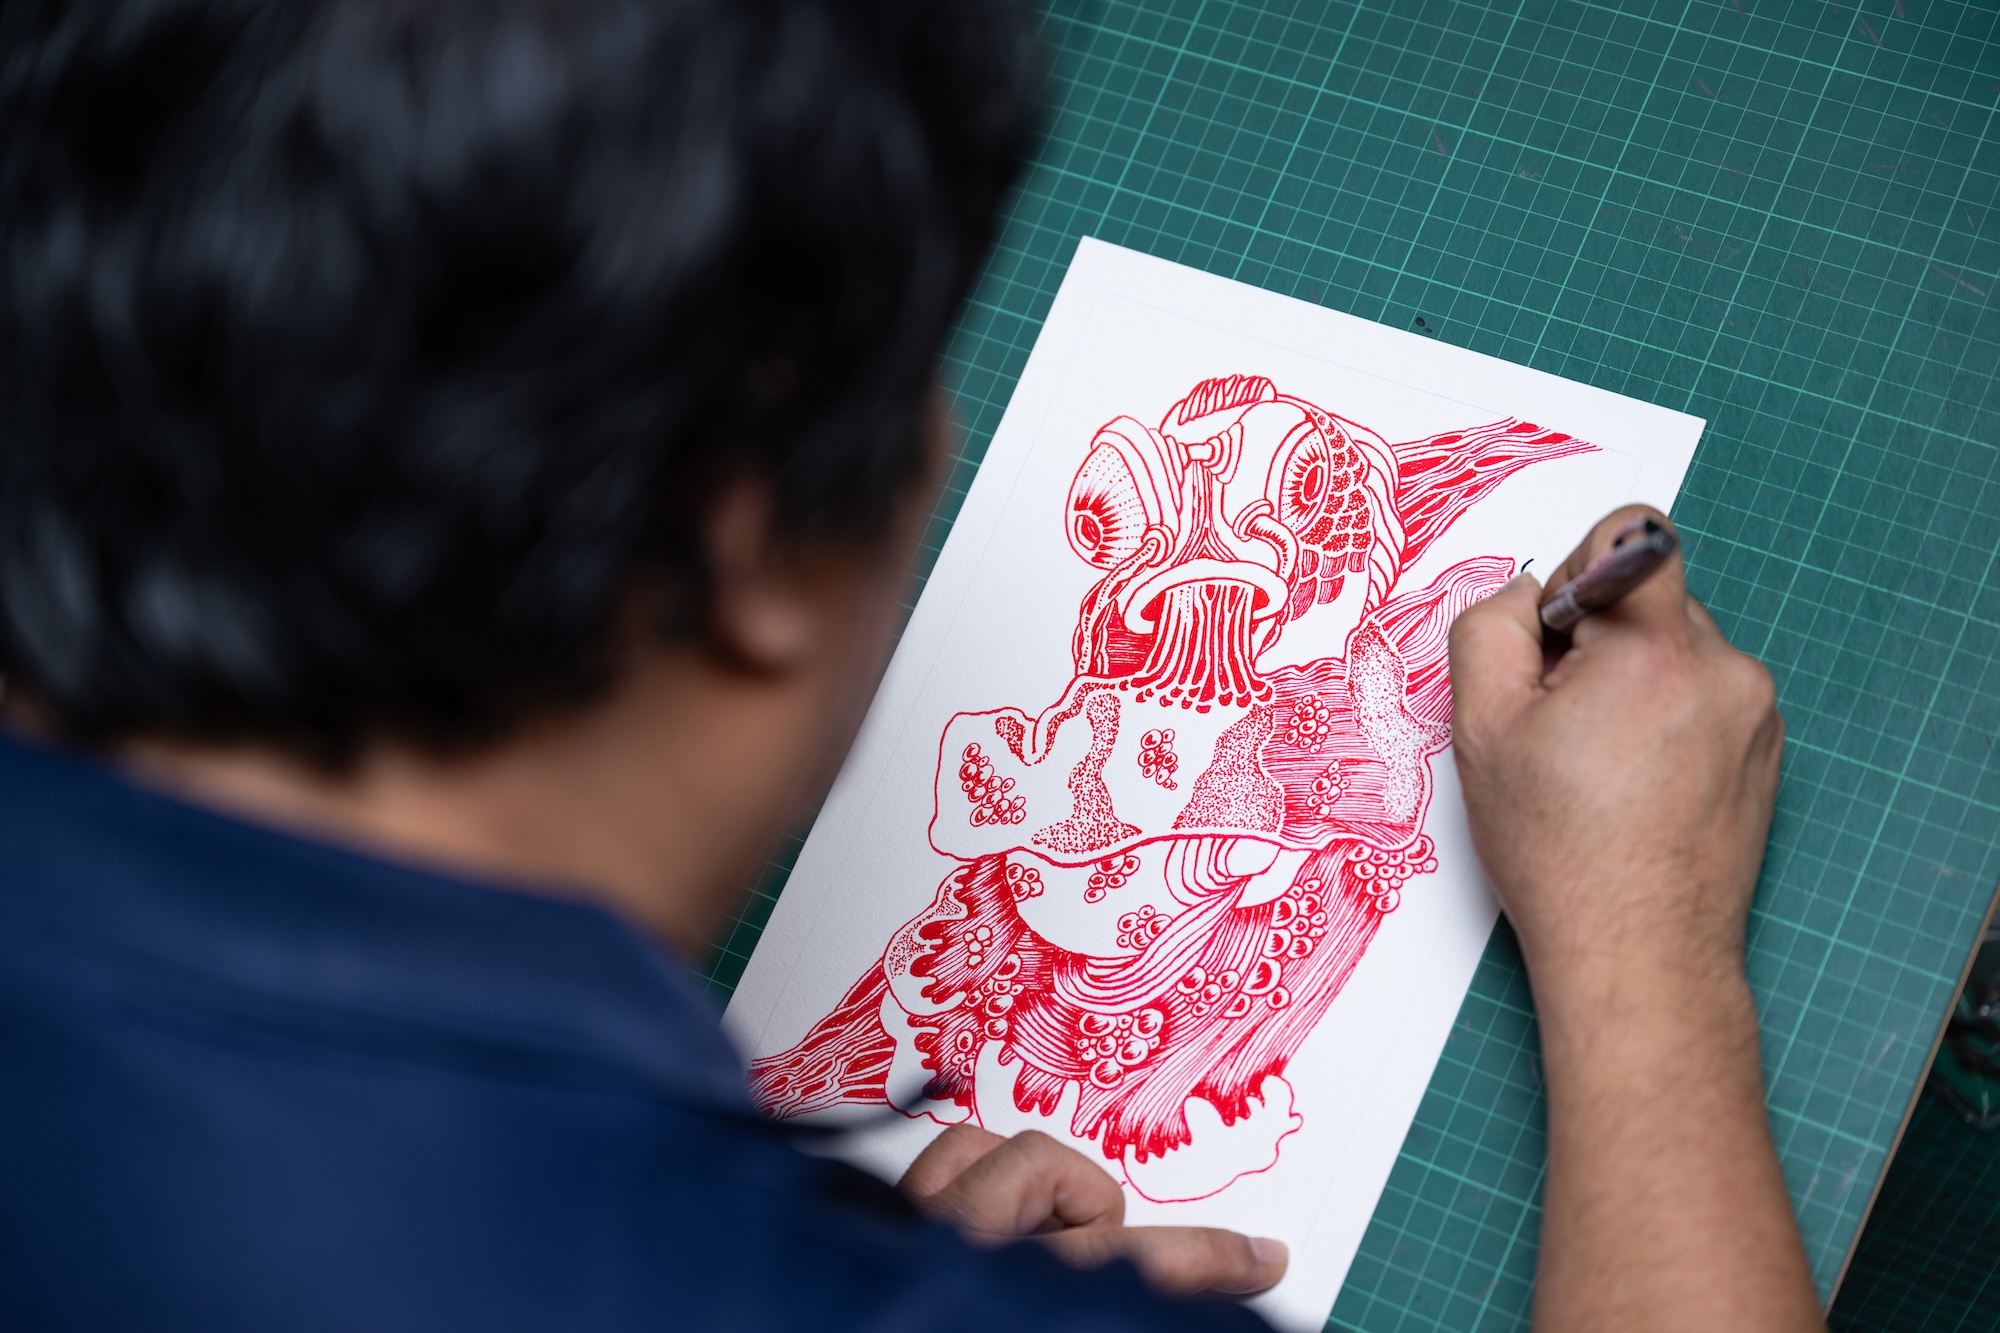 Balajadia’s intricate pen drawings are completely improvised